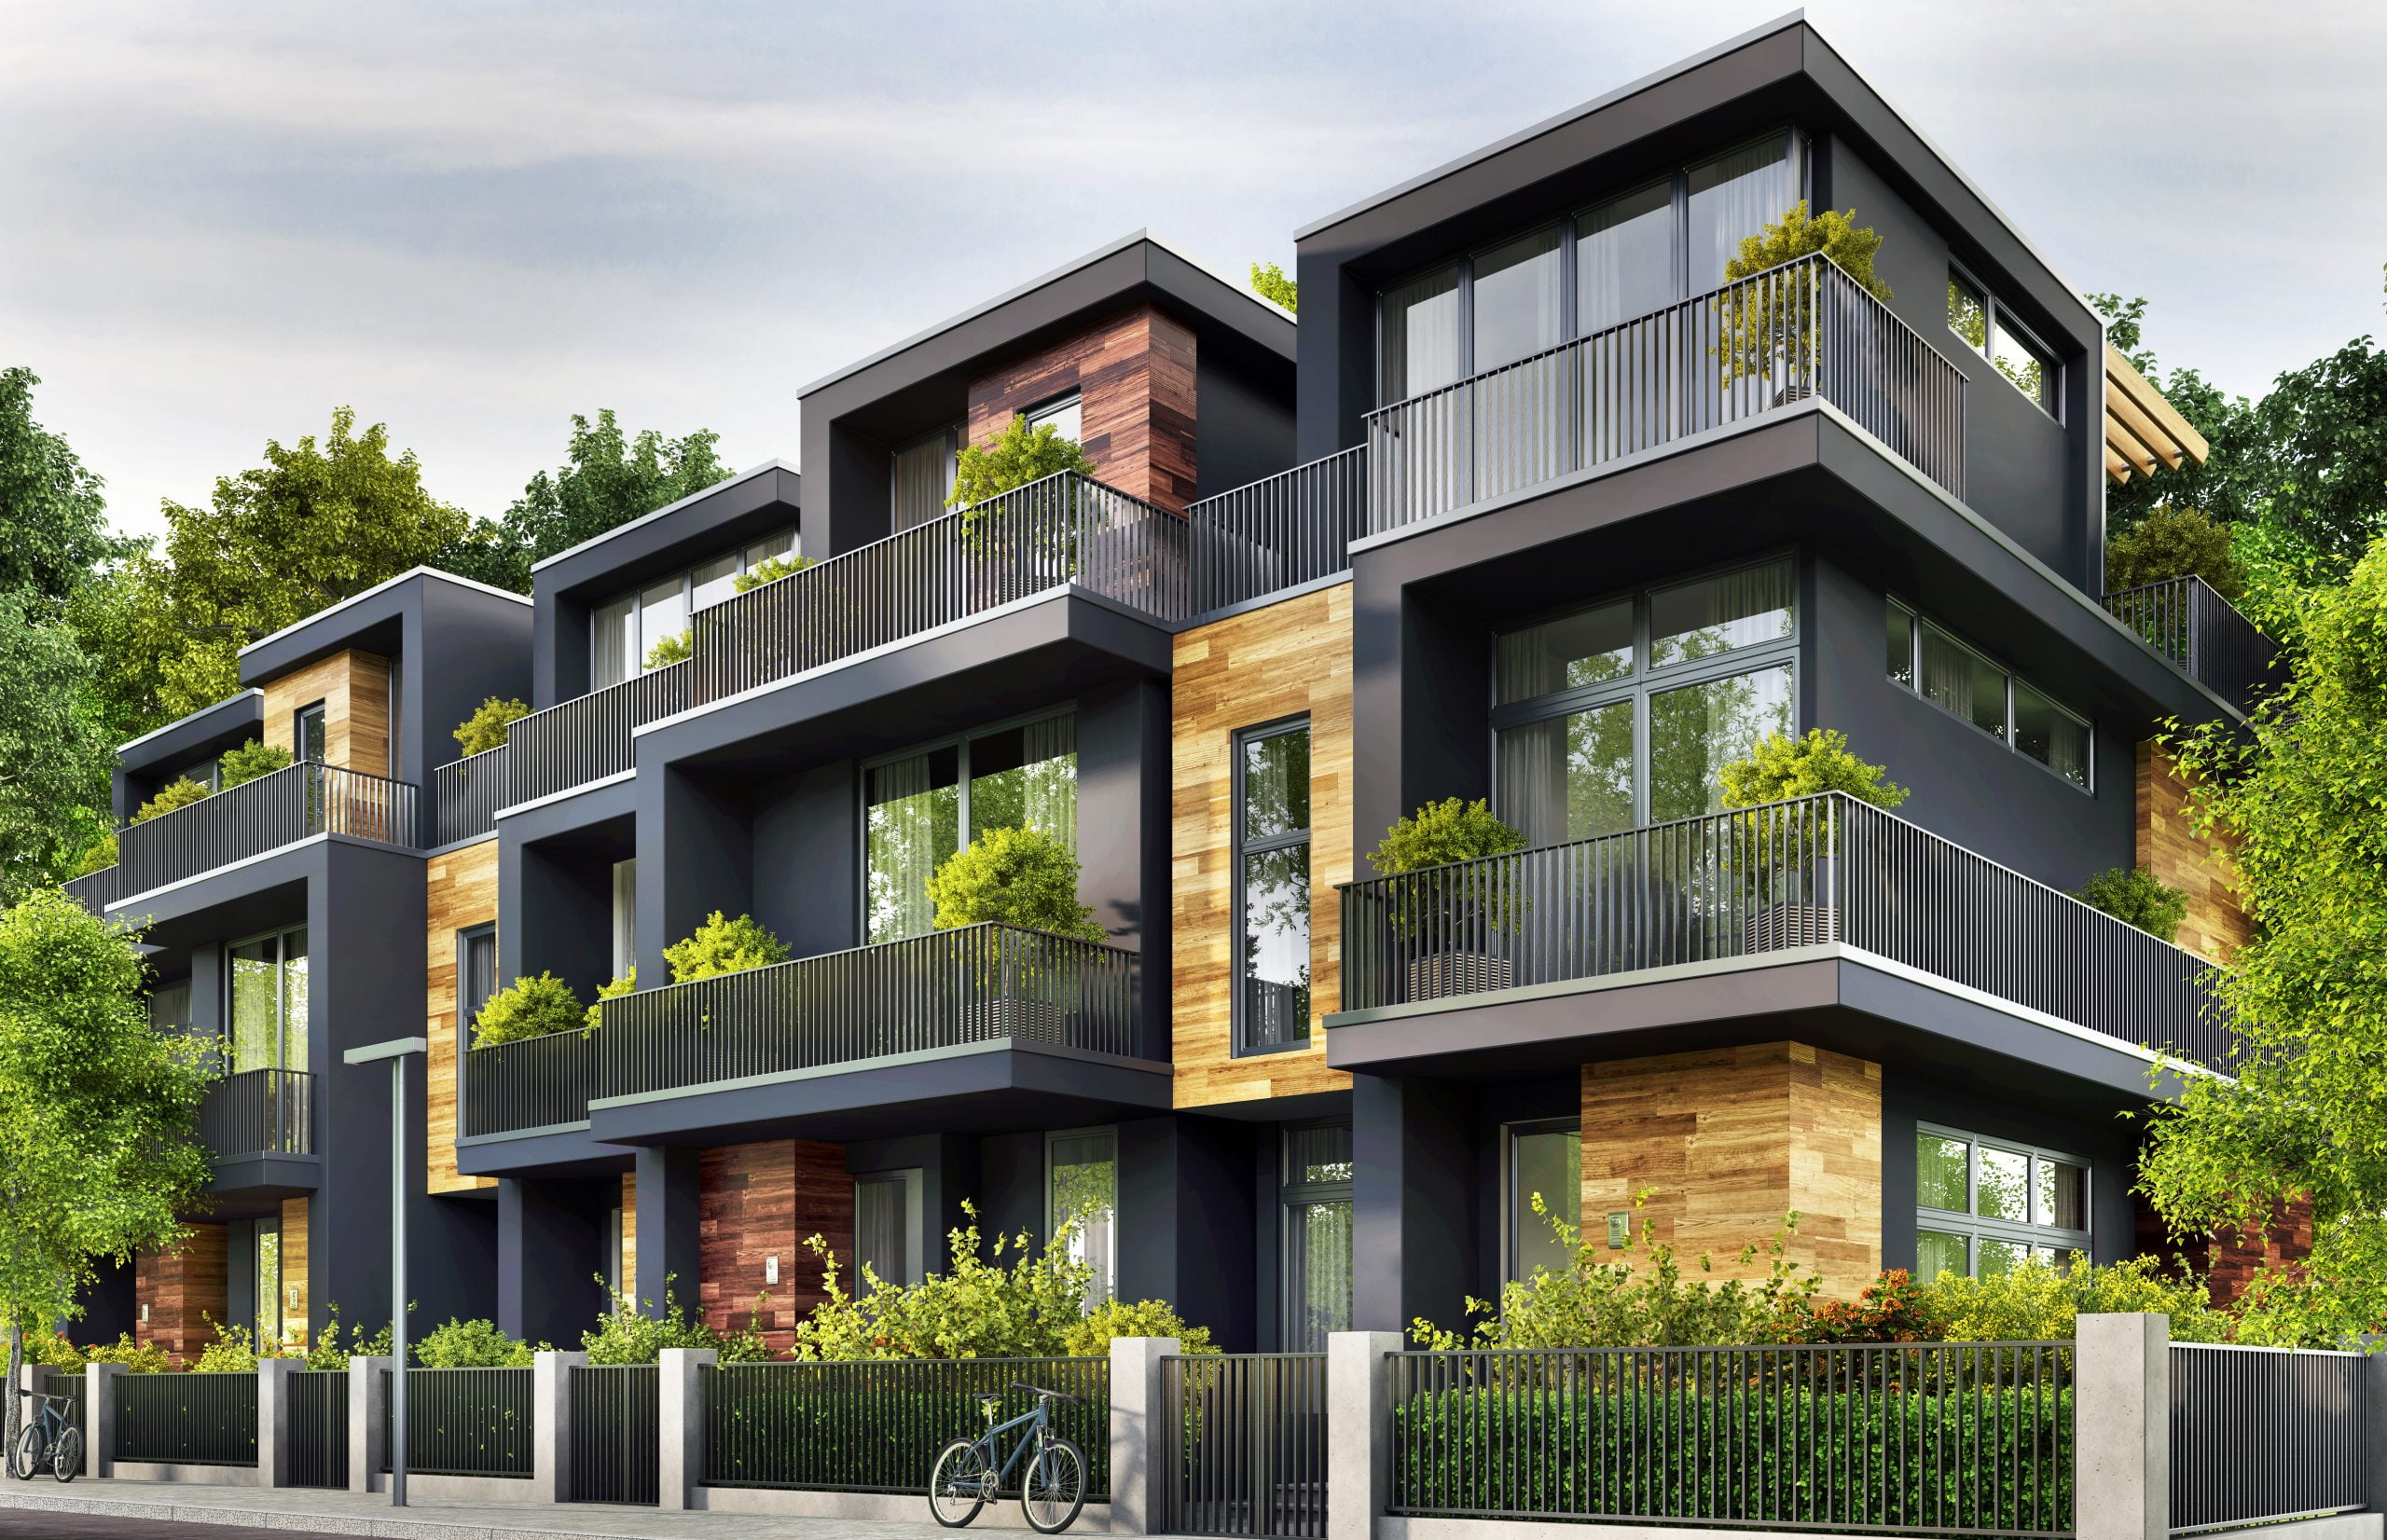 Modern looking condo complex with lots of windows and greenery.